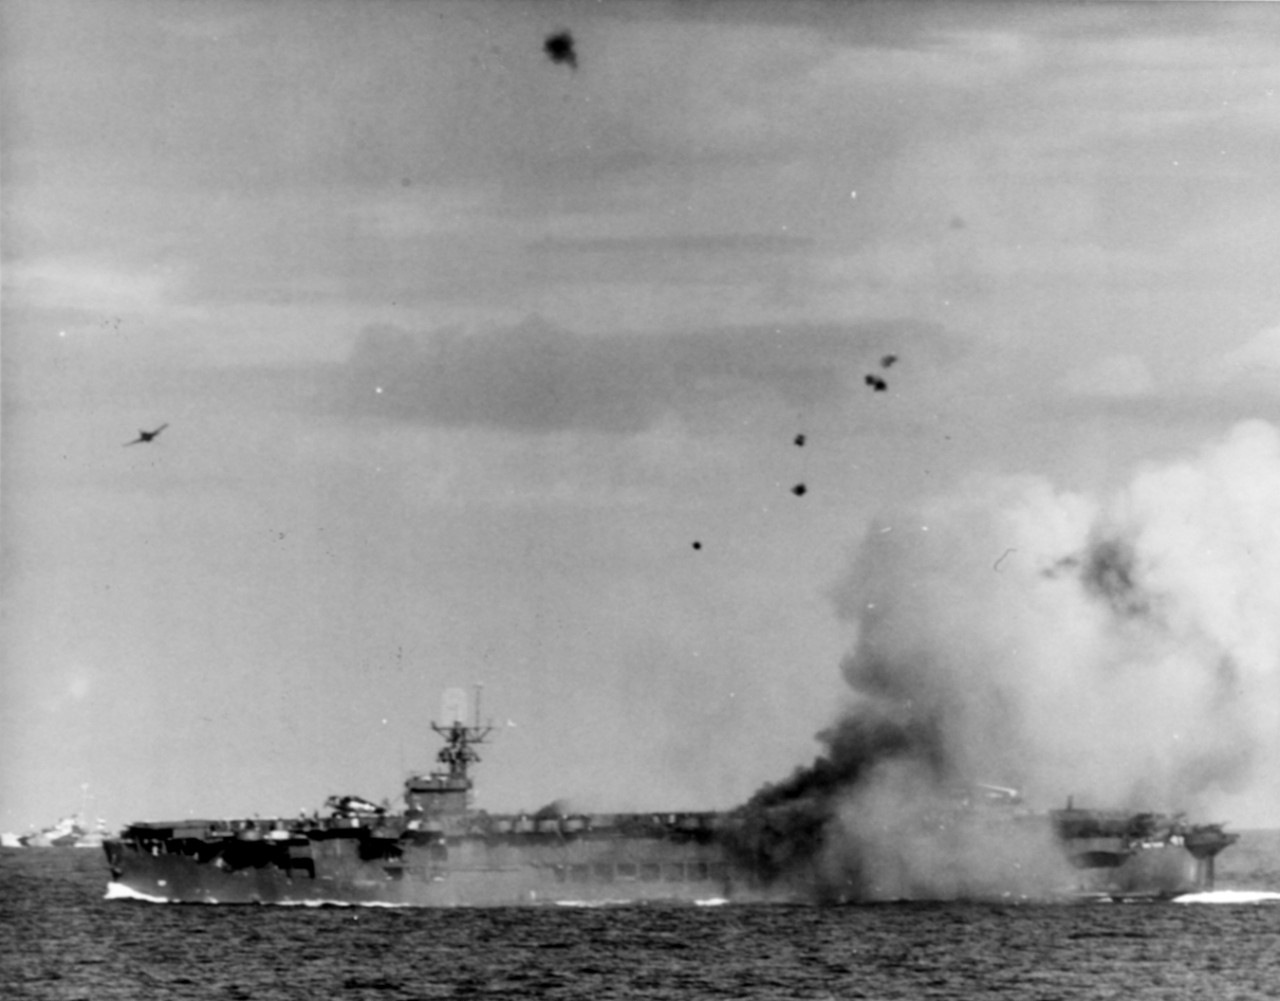 F6F completing pullout after chasing Zeke which crashed into USS Suwannee (CVE-27), 25 October 1944. Taken by USS Petrof Bay (CVE-80) Air Department.